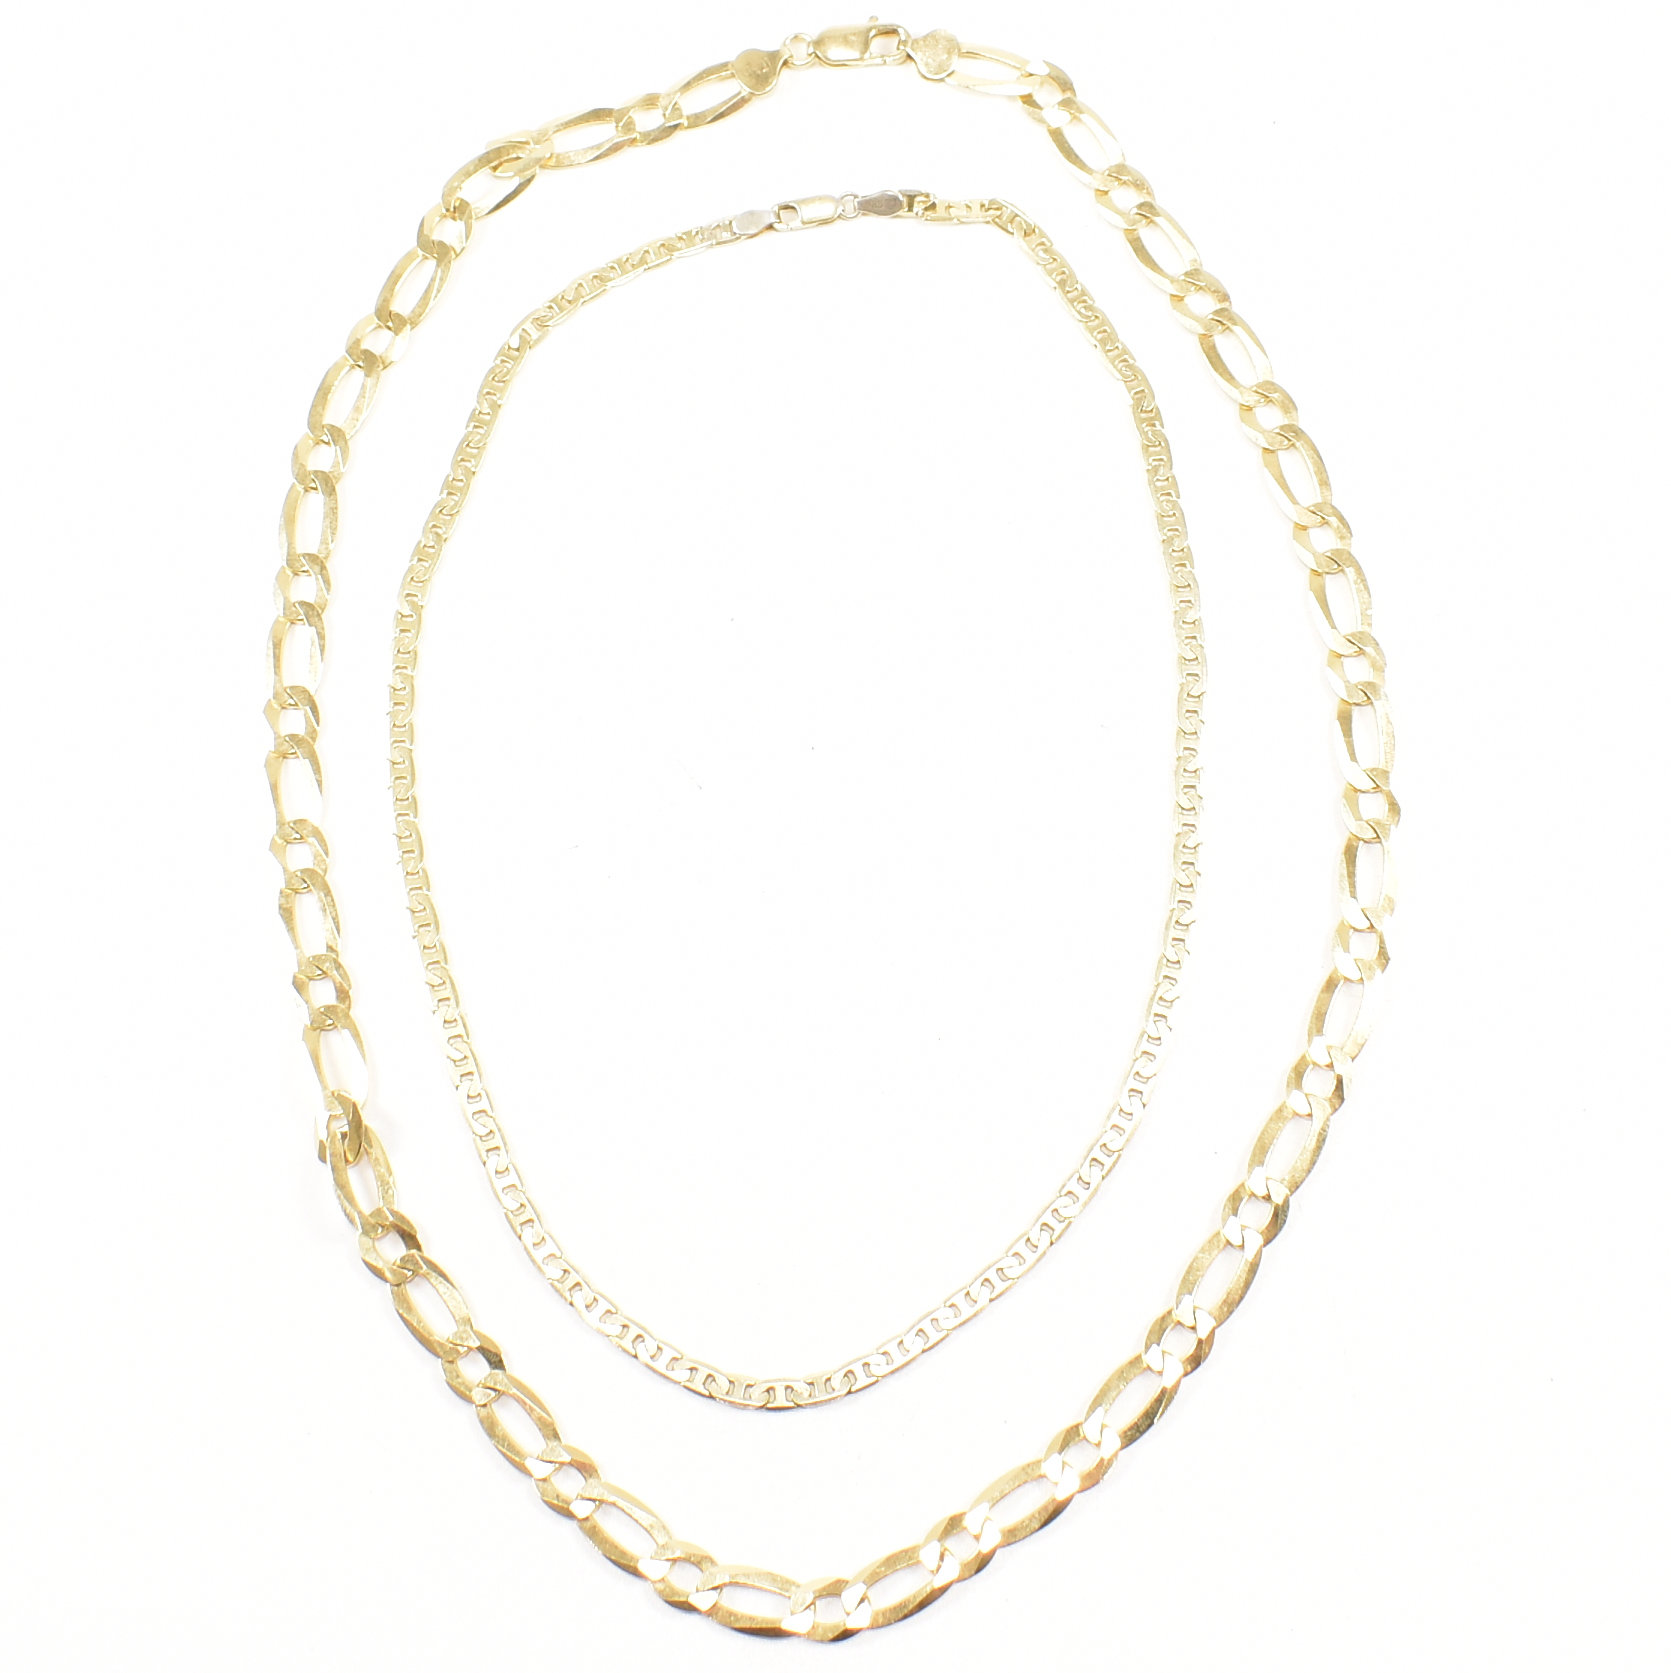 TWO HALLMARKED GOLD ON 925 SILVER CHAIN NECKLACES - Image 2 of 4